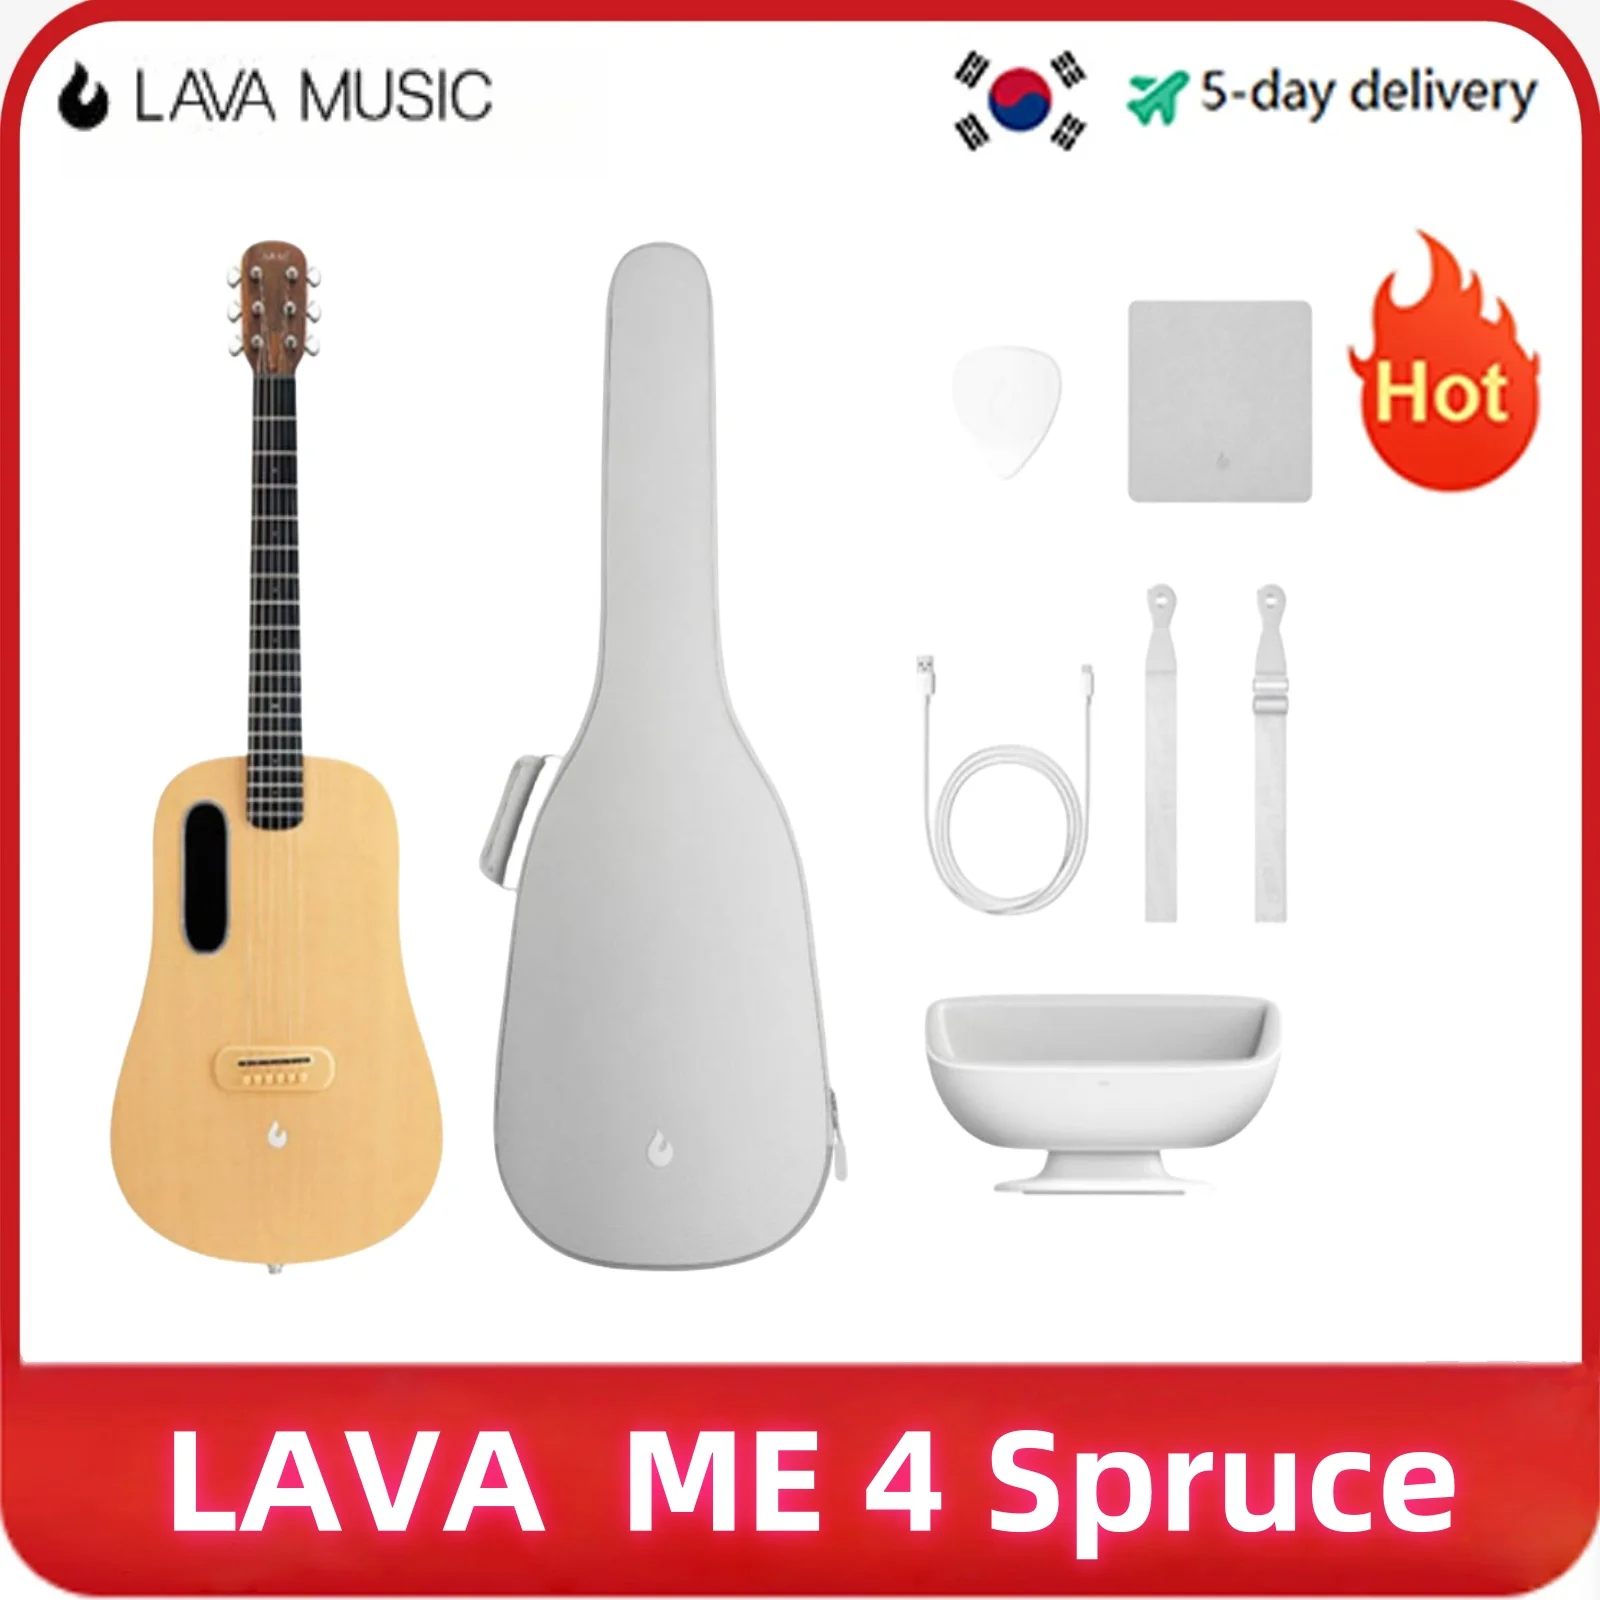 

LAVA ME 4 Basic 36 / 41 inch Solid Spruce Top HILAVA 2.0 Smart Acoustics Electric Guitar with 3.5 inch TouchScreen FreeBoost 2.0